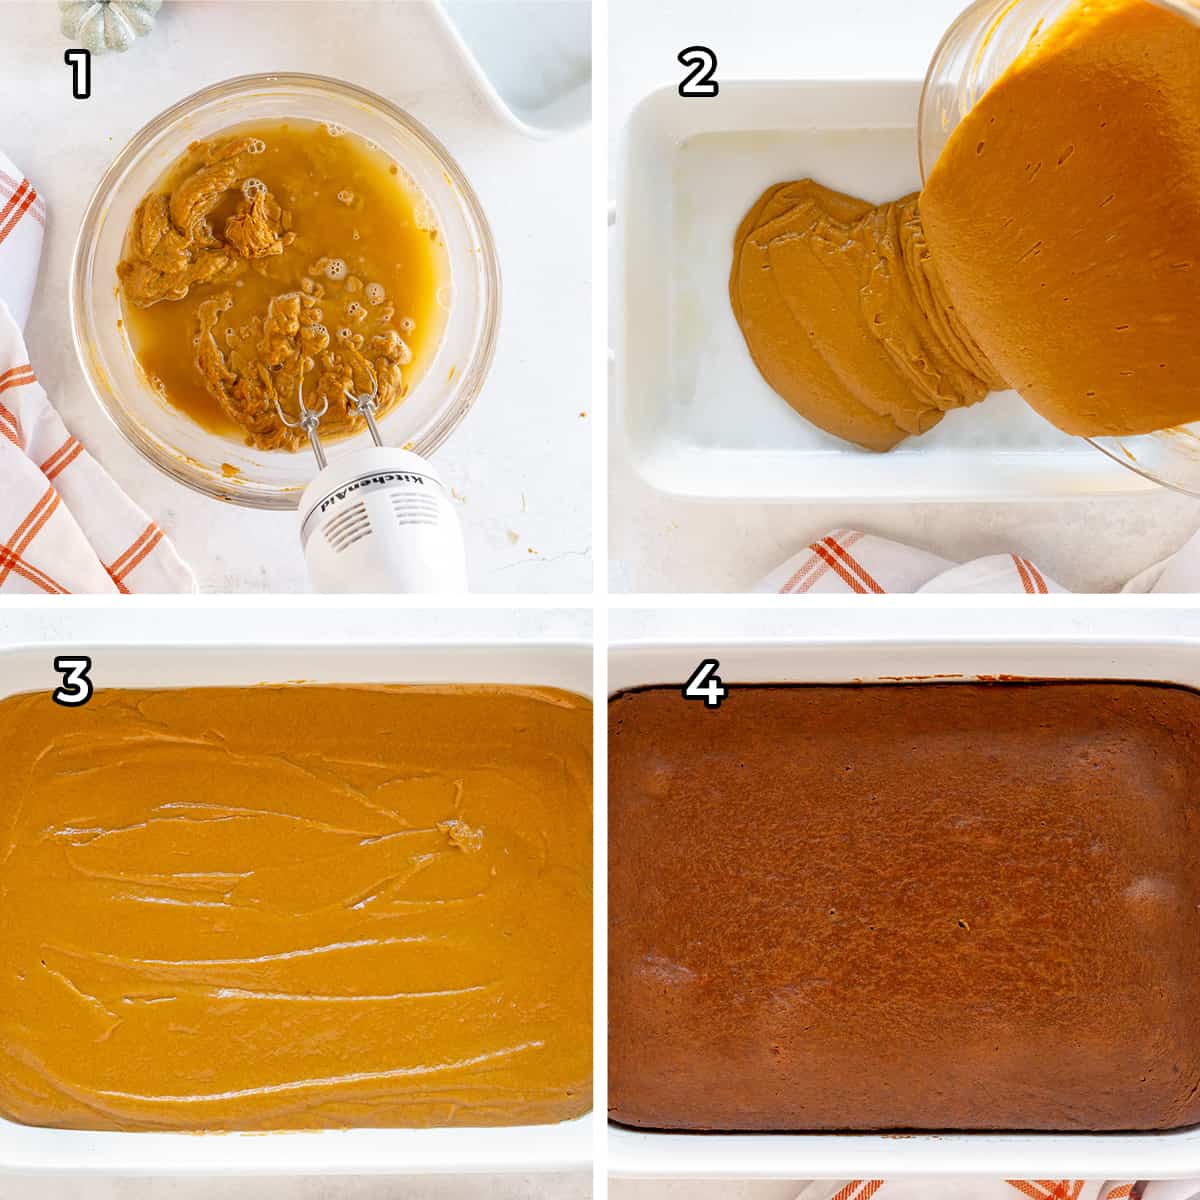 Pumpkin Gingerbread batter poured into a baking dish and baked.